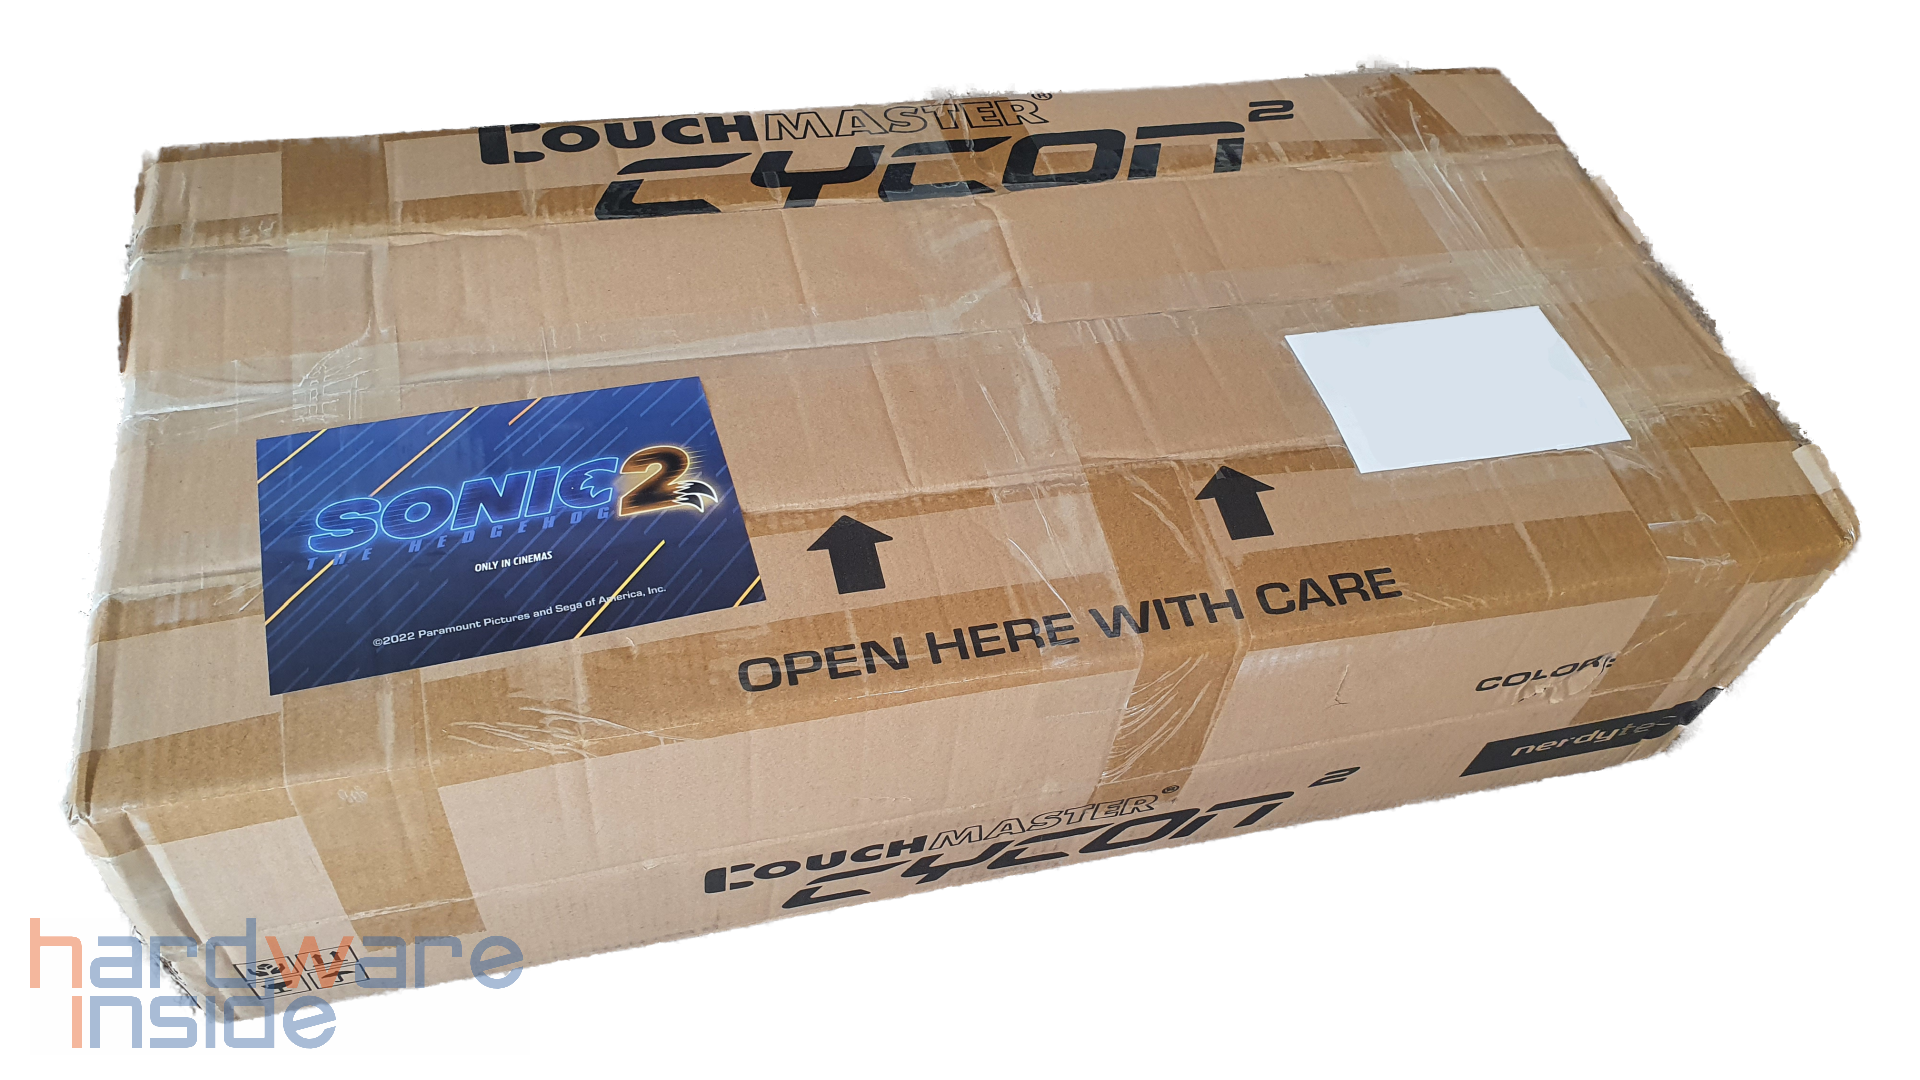 couchmaster-cycon2-verpackung.png